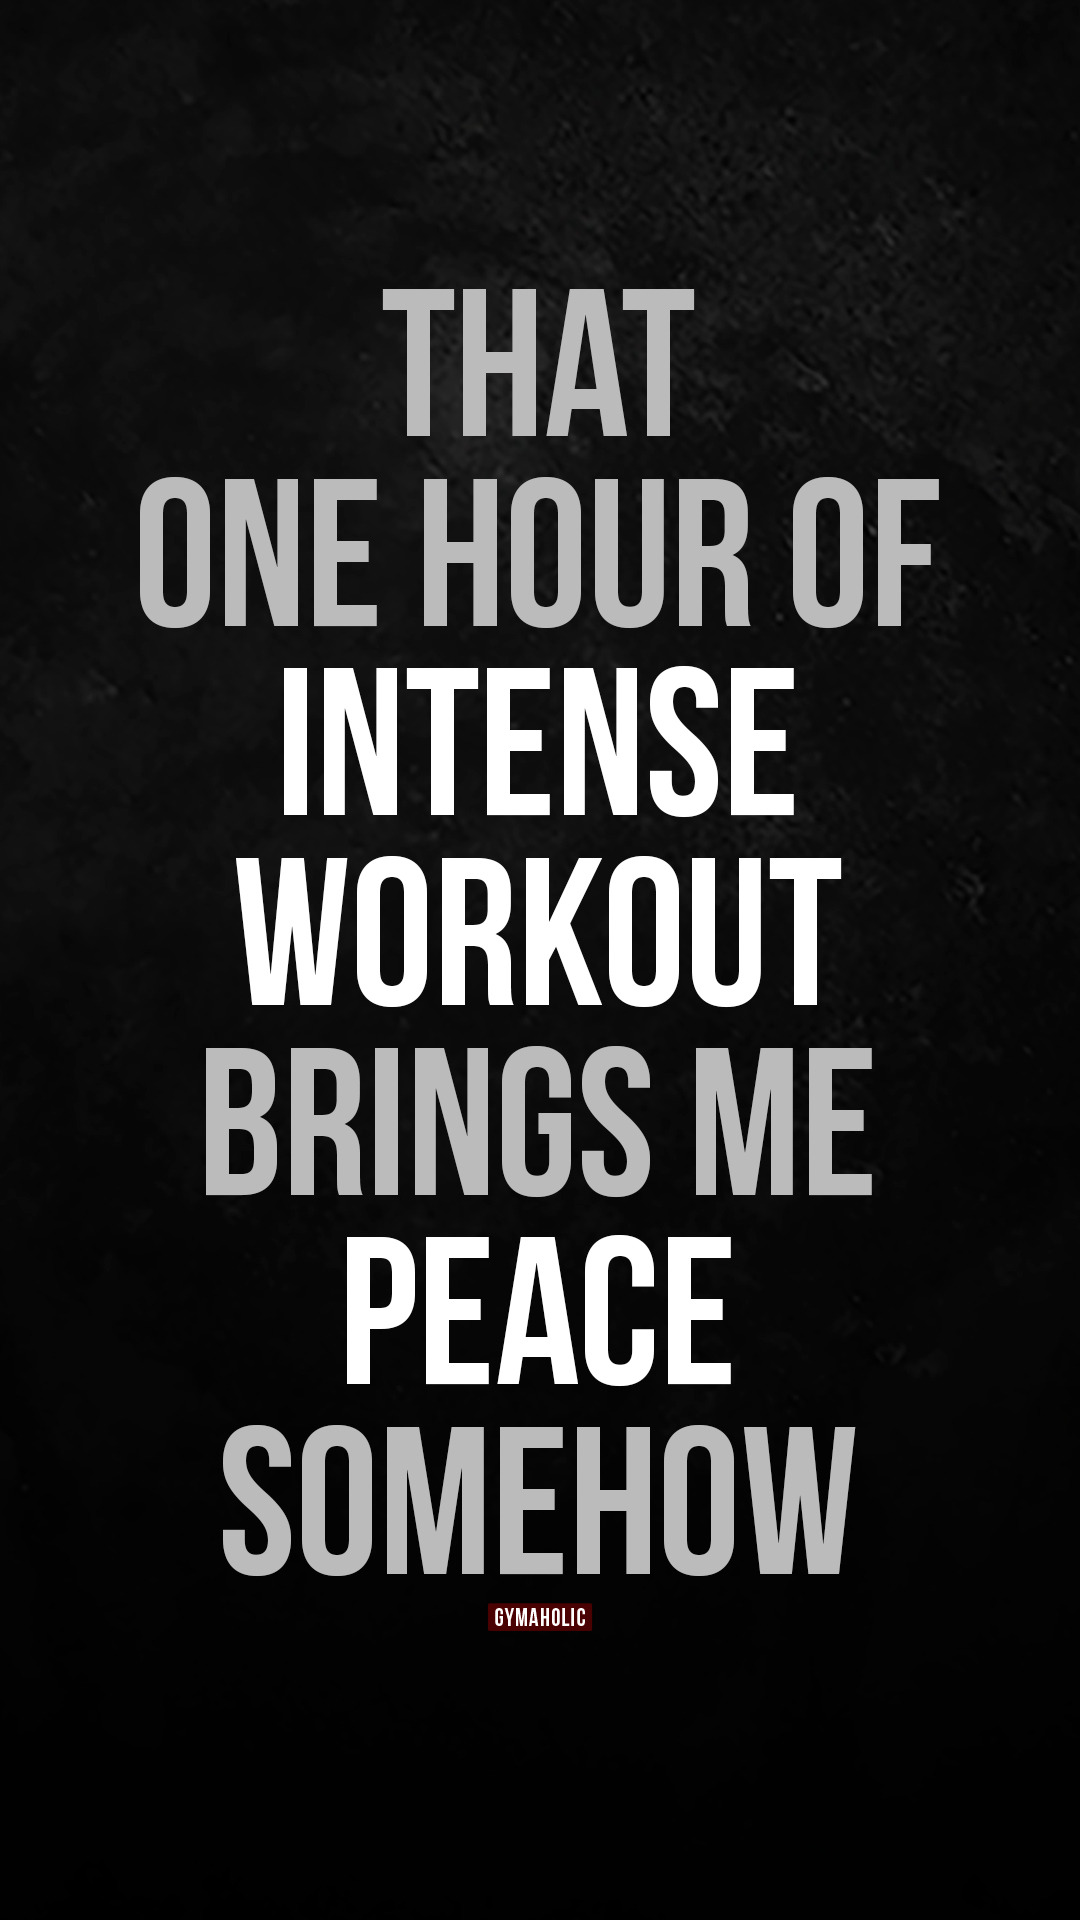 That one hour of intense workout brings me peace somehow